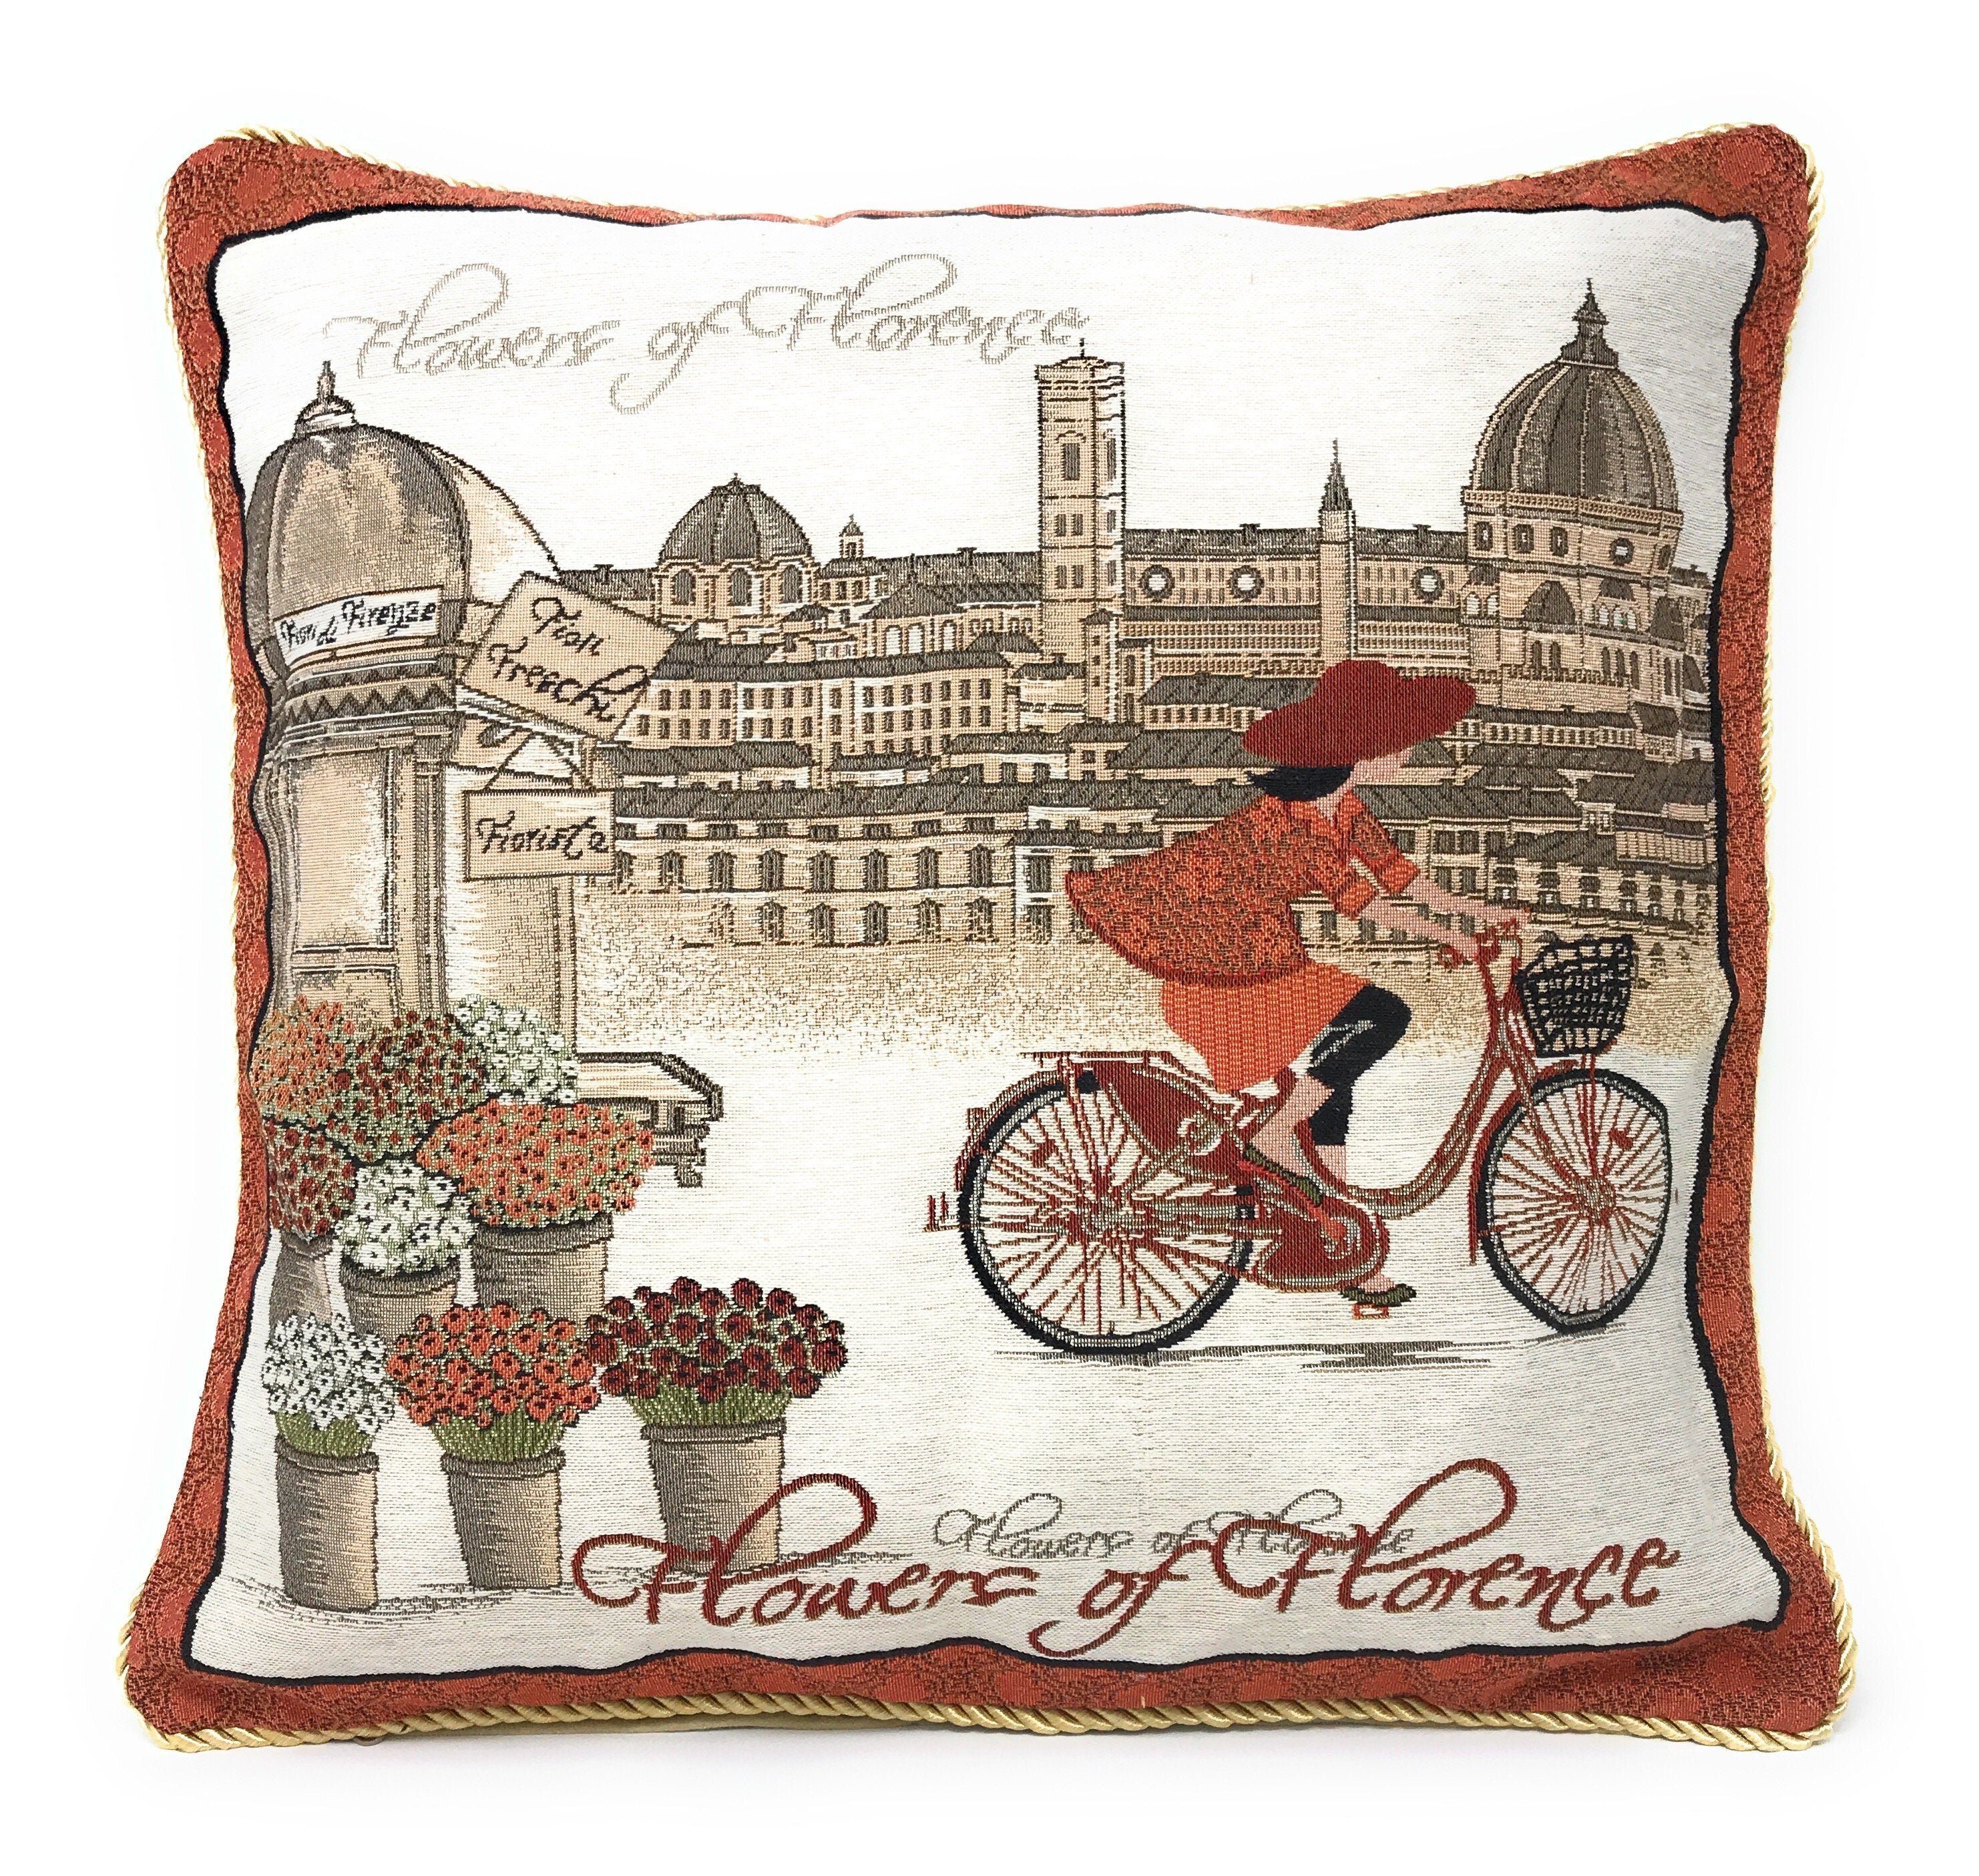 Tache Flowers of Florence Woven Tapestry Throw Pillow Cover 18x 18 (14003) - Tache Home Fashion